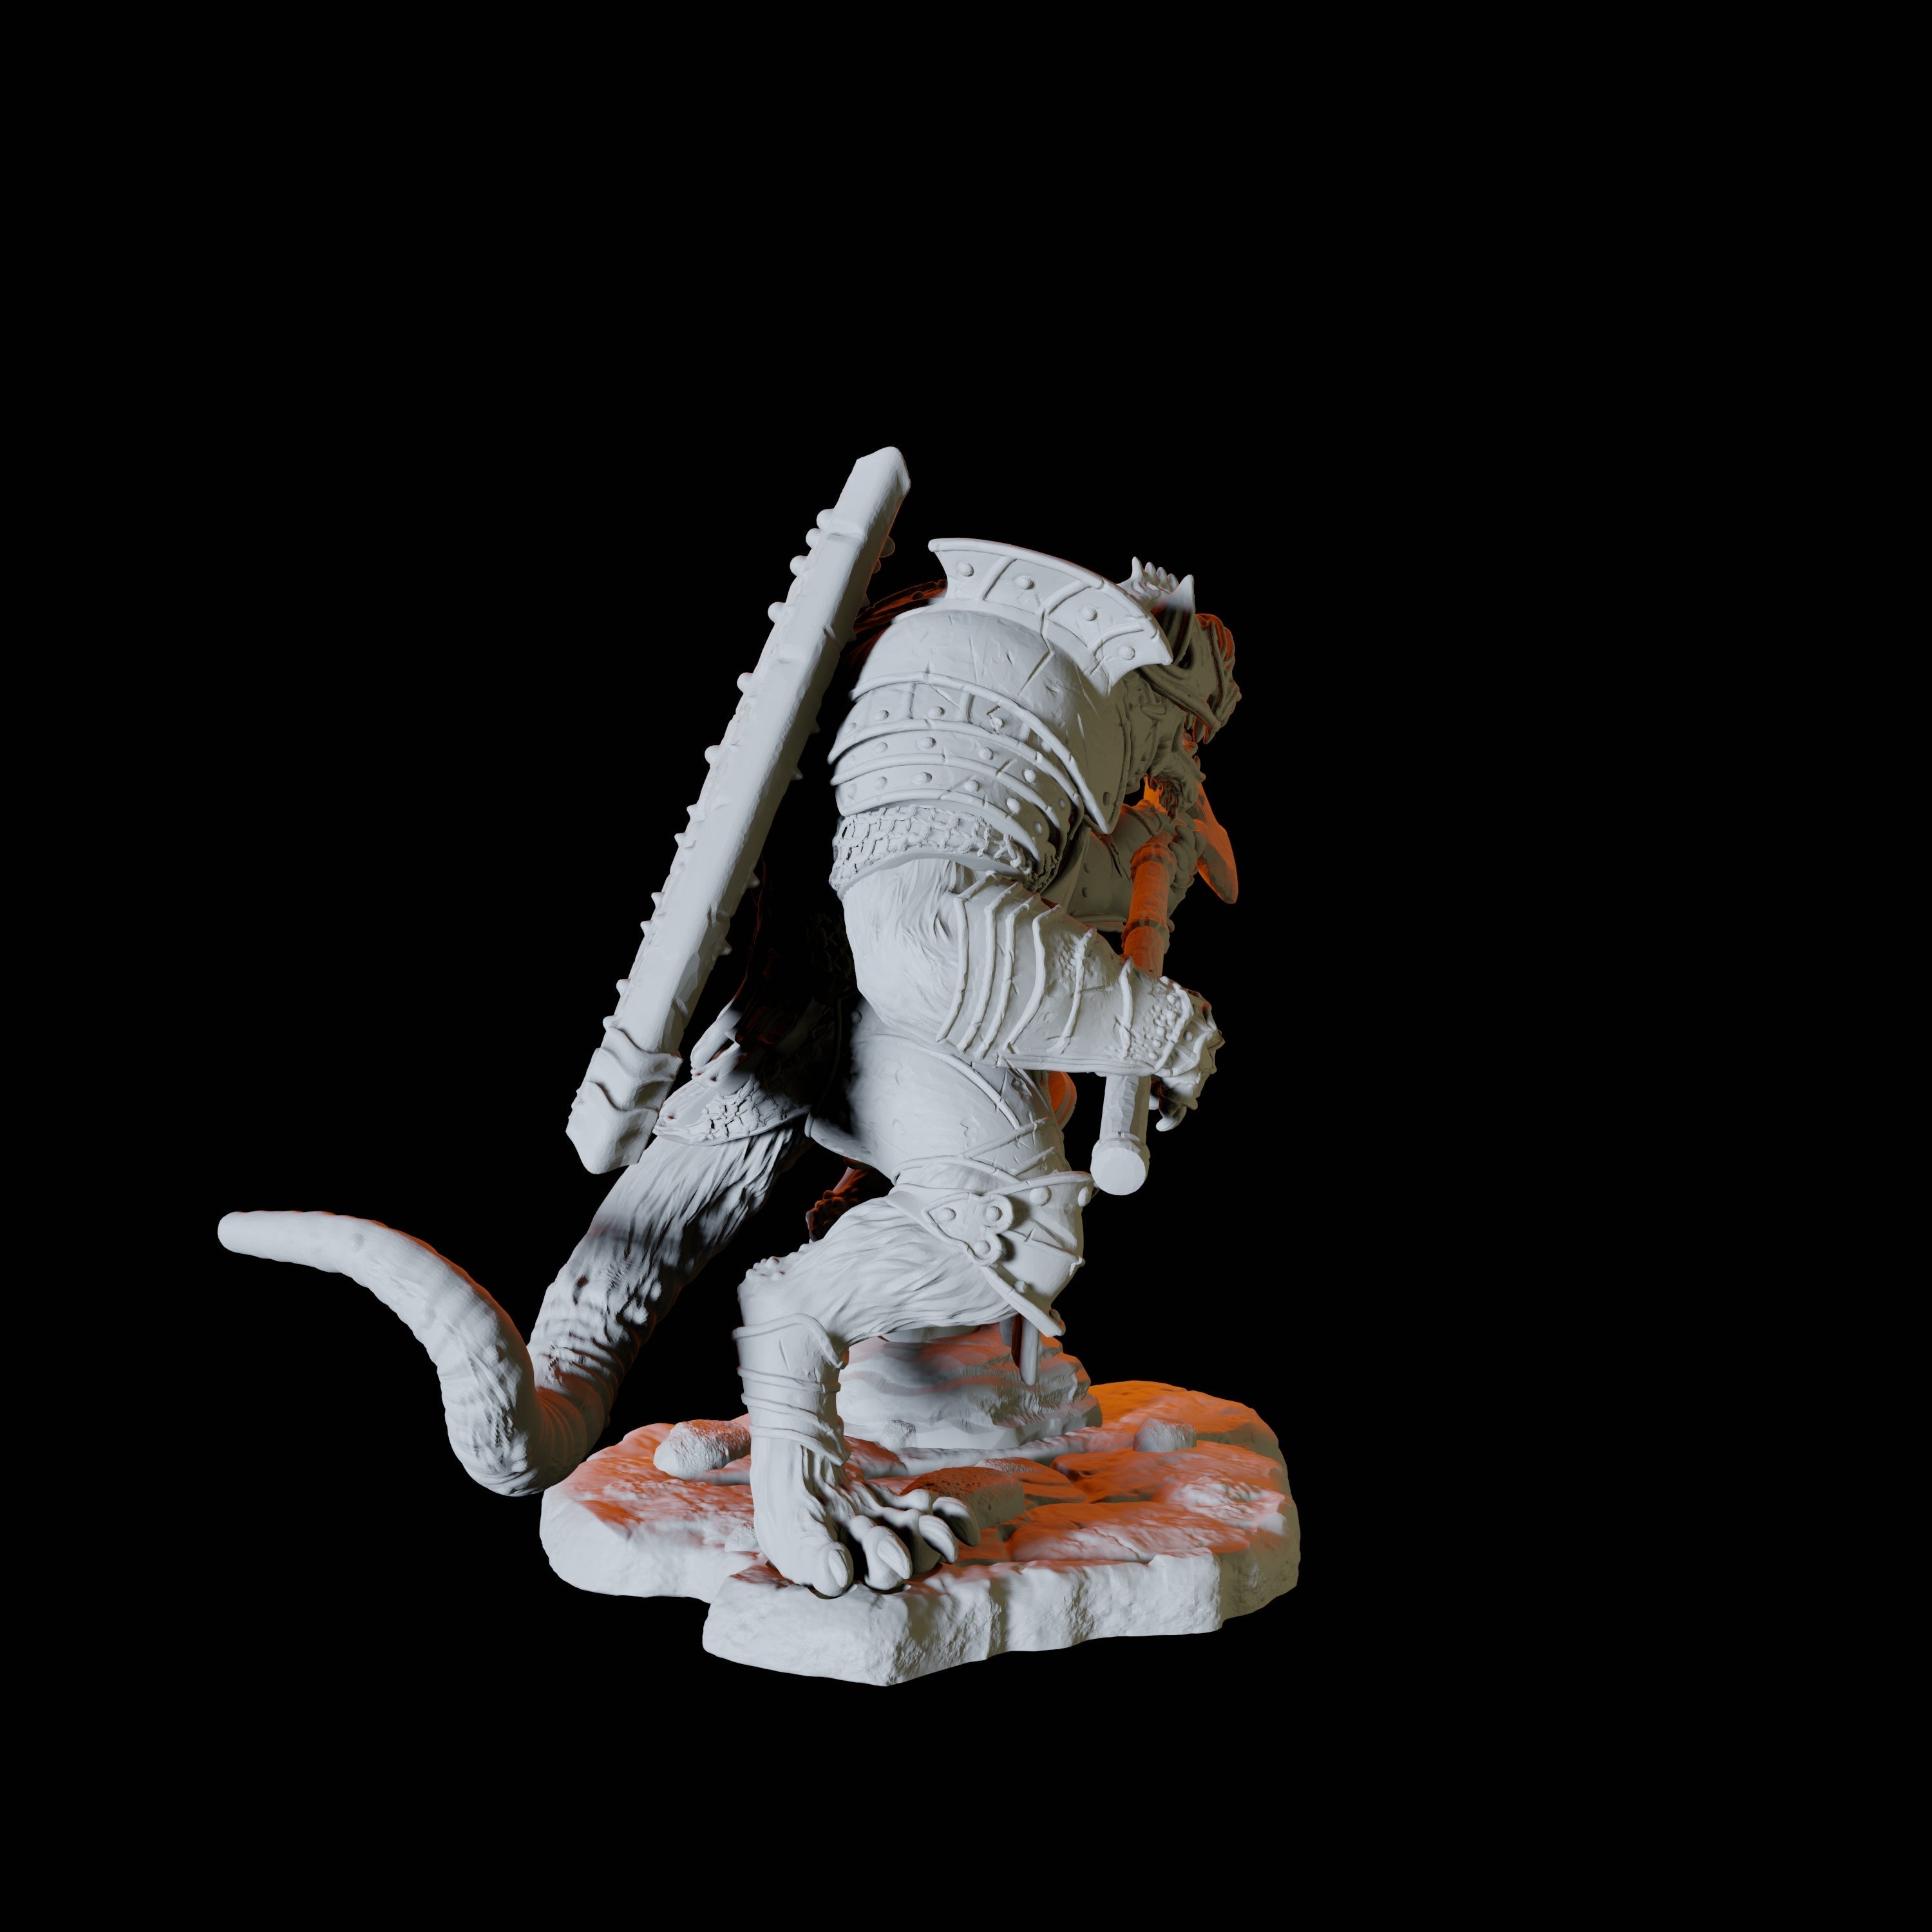 Four Ratfolk Soldiers Miniature for Dungeons and Dragons, Pathfinder or other TTRPGs